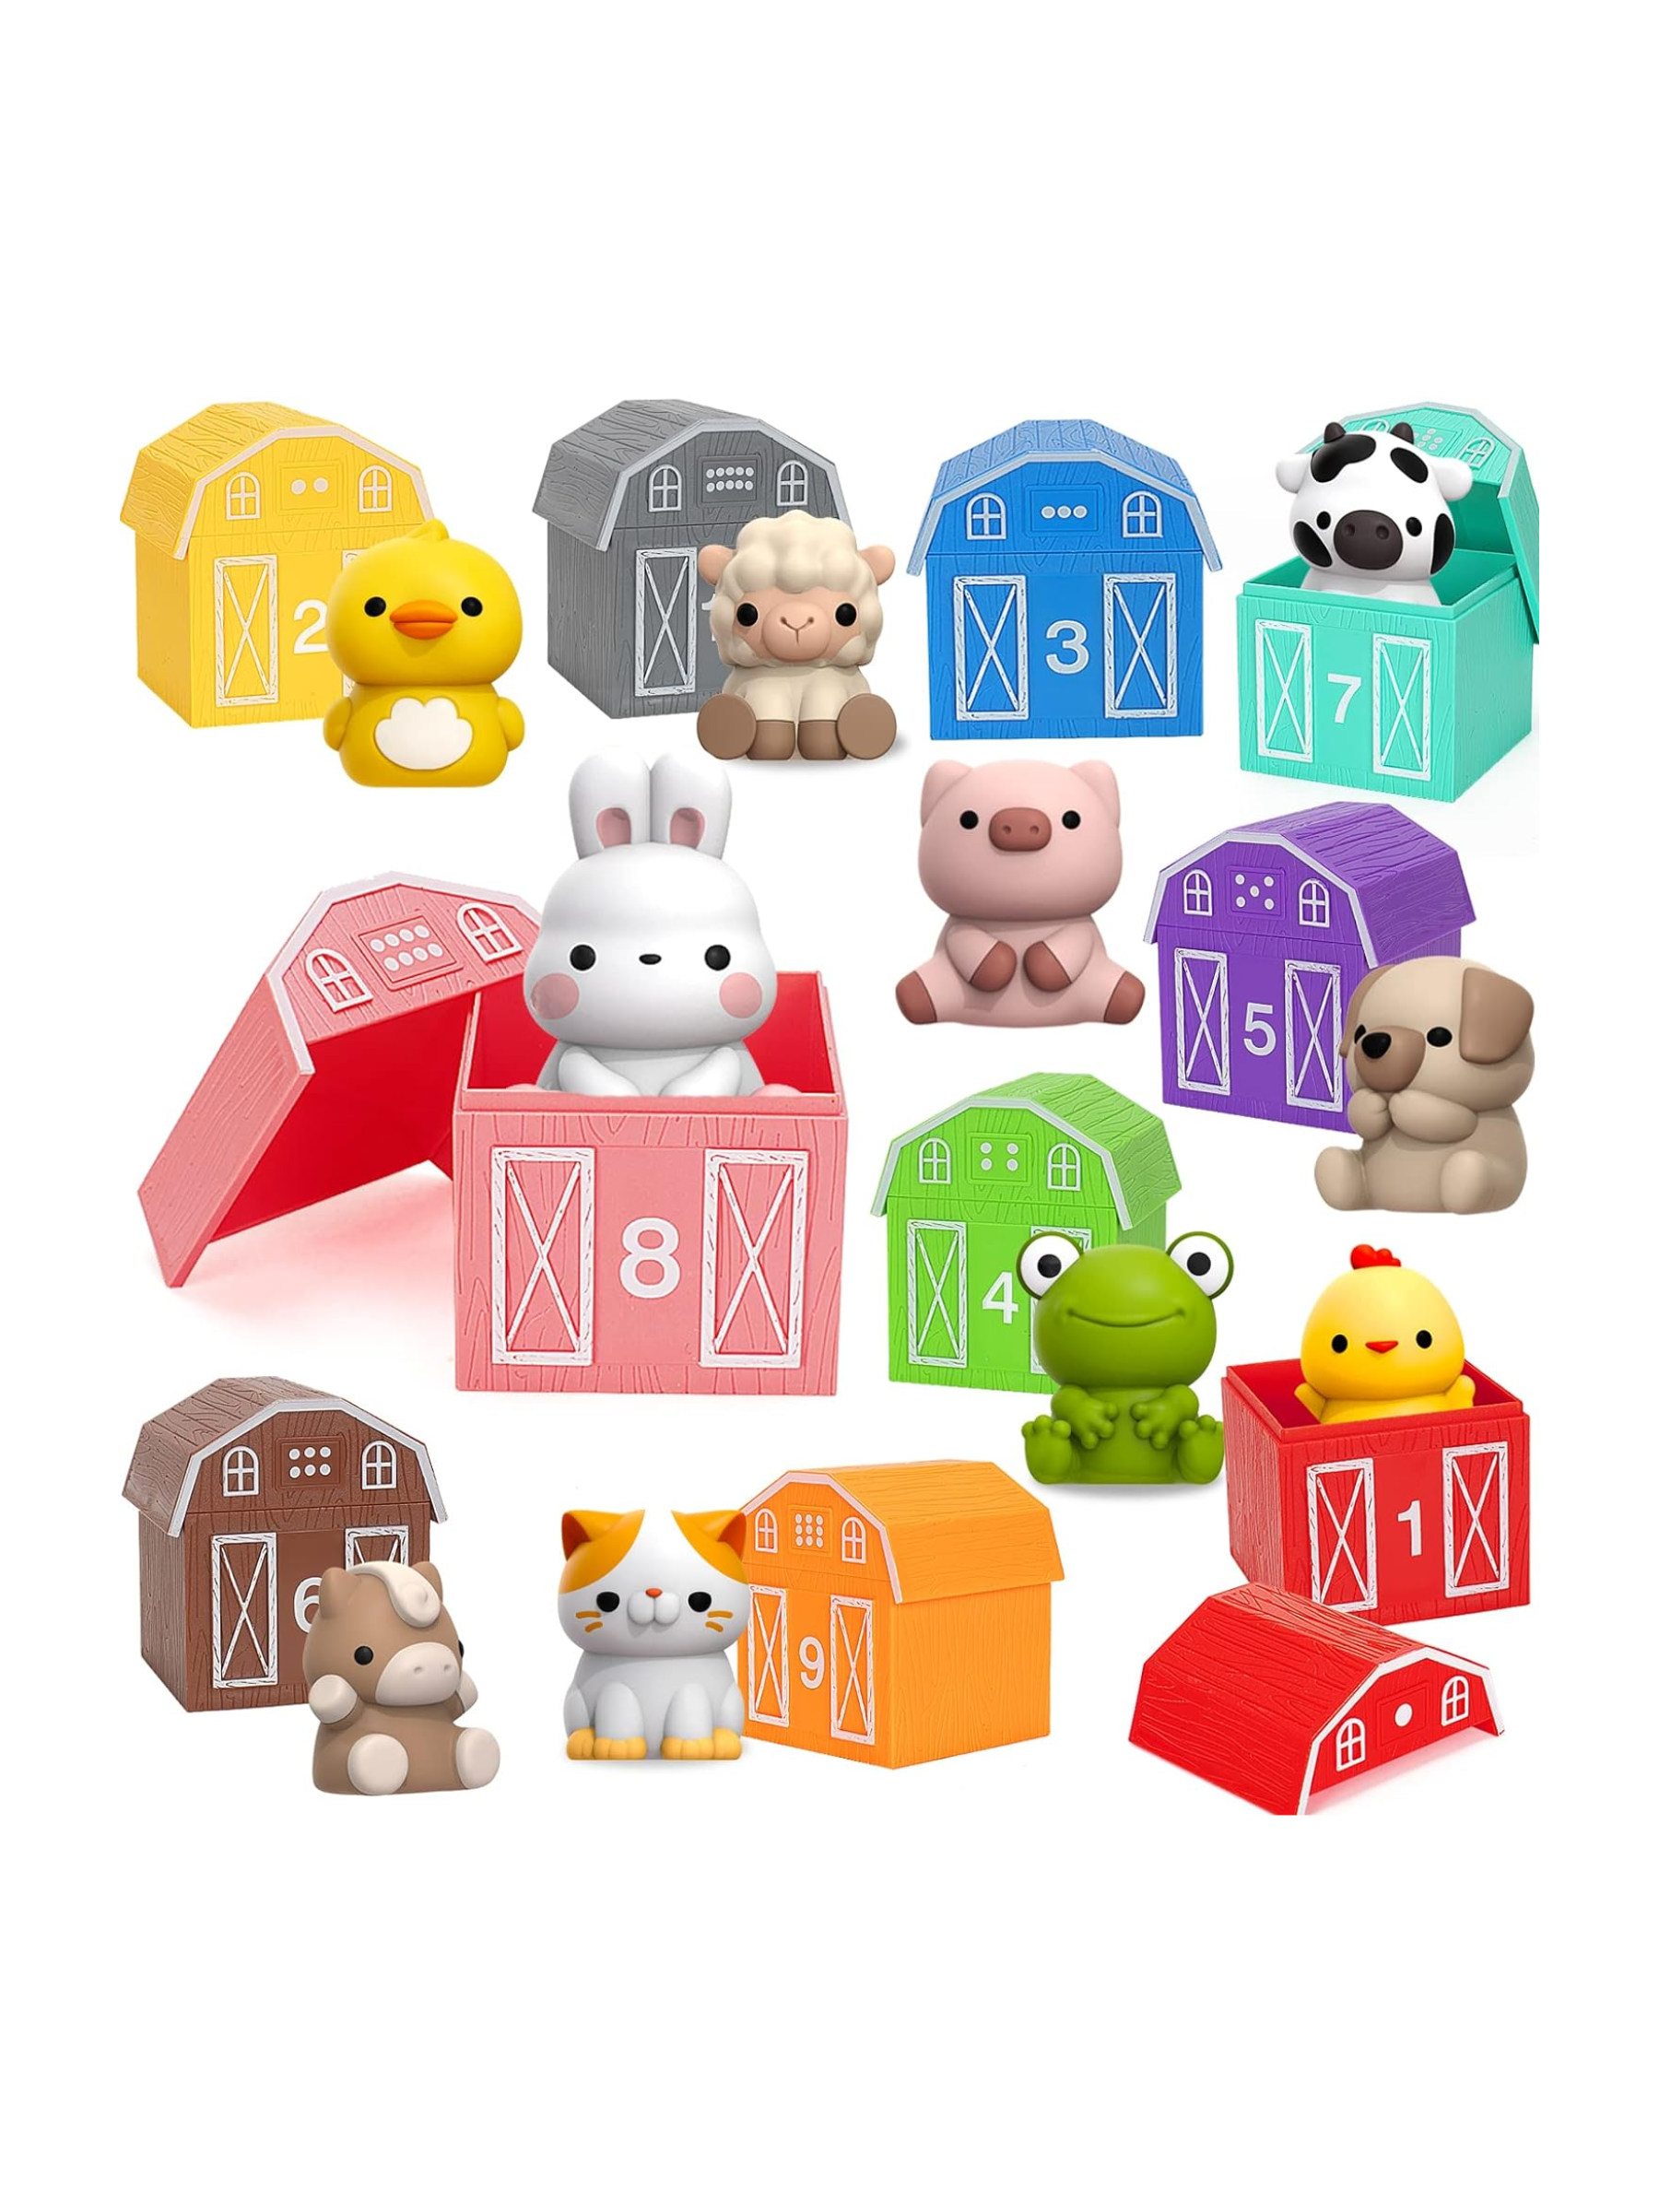 <p>This adorable set teaches kids about matching, numbers, and to identify different animals. Bonus: you can use the figurines to teach them all those super cute animal noises.</p> <p><strong>What our expert says:</strong> A friend of mine told me that her son received this farm animals toy set for his first birthday and has played with it “literally every day since.” Given that her son is now two-and-a-half, that is a glowing recommendation. <em>-SM</em></p> $25, Amazon. <a href="https://www.amazon.com/Learning-Toddlers-Montessori-Counting-Christmas/dp/B0B46BN89X/ref=sxin_16_pa_sp_search_thematic_sspa?">Get it now!</a><p>Sign up for today’s biggest stories, from pop culture to politics.</p><a href="https://www.glamour.com/newsletter/news?sourceCode=msnsend">Sign Up</a>